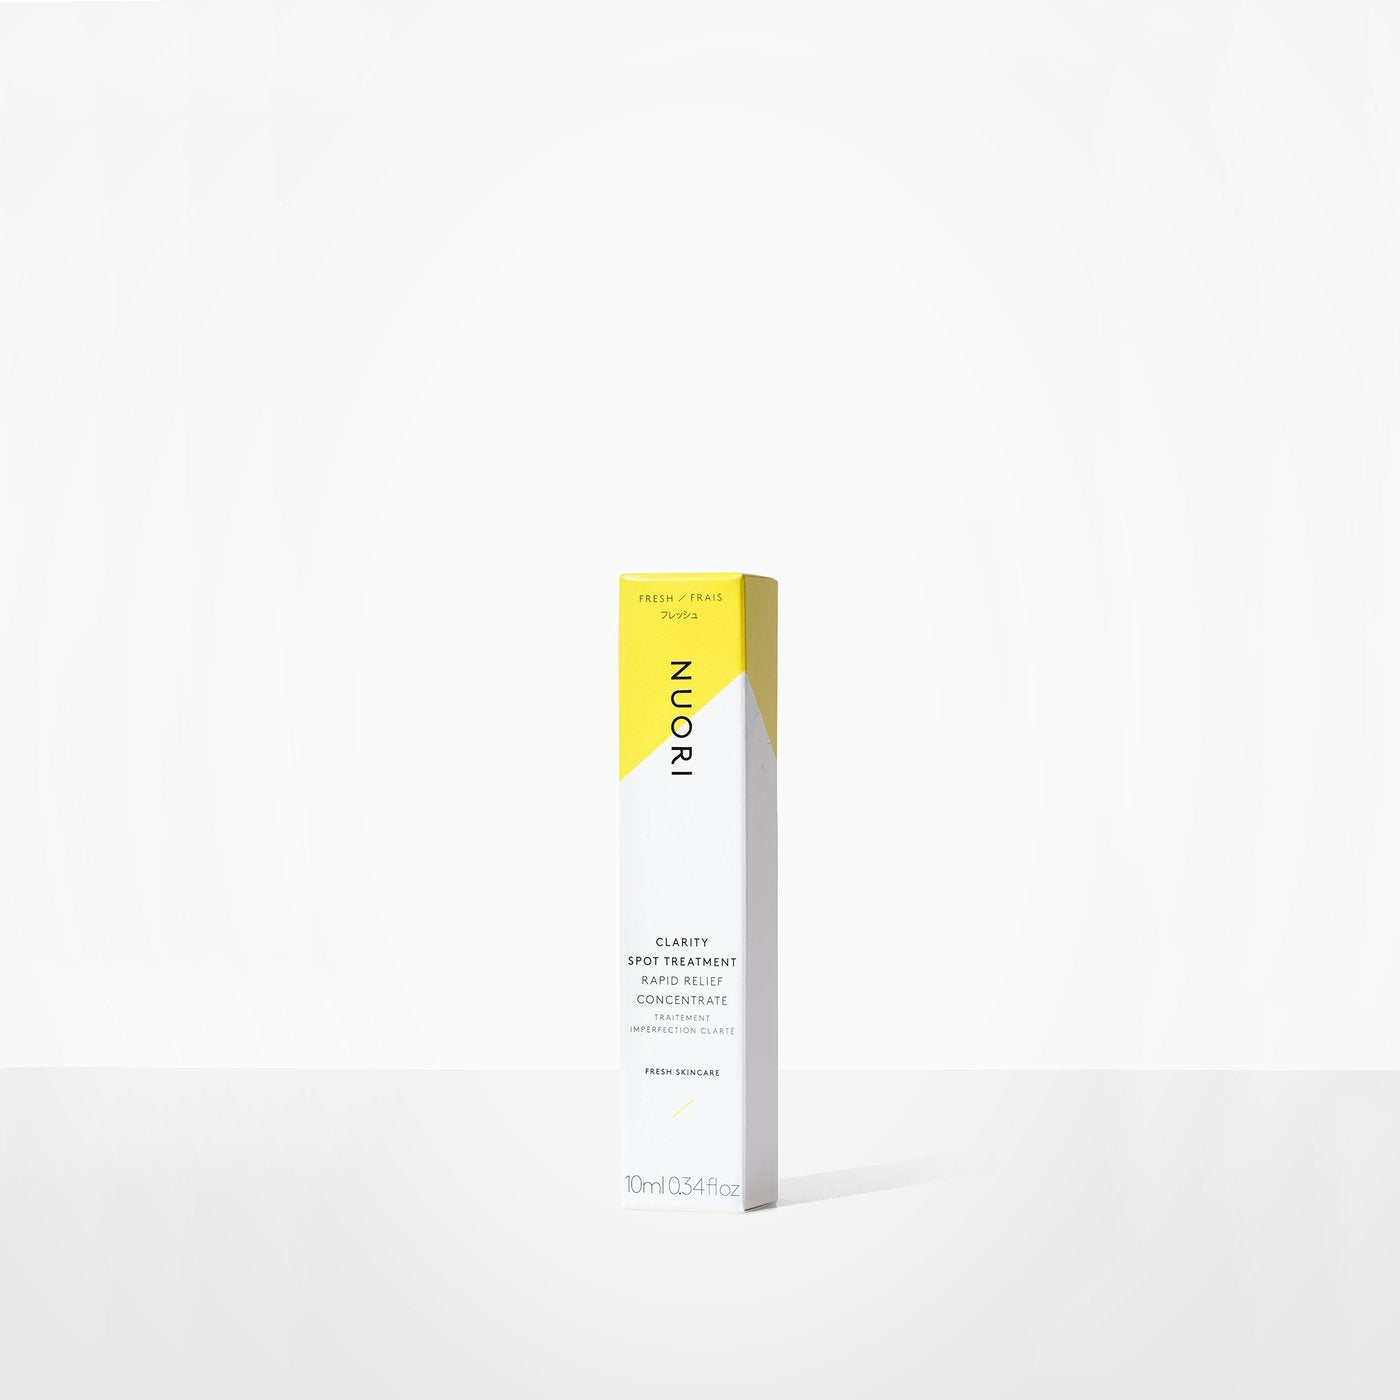 Clarity Spot Treatment | Rapid Relief Concentrate